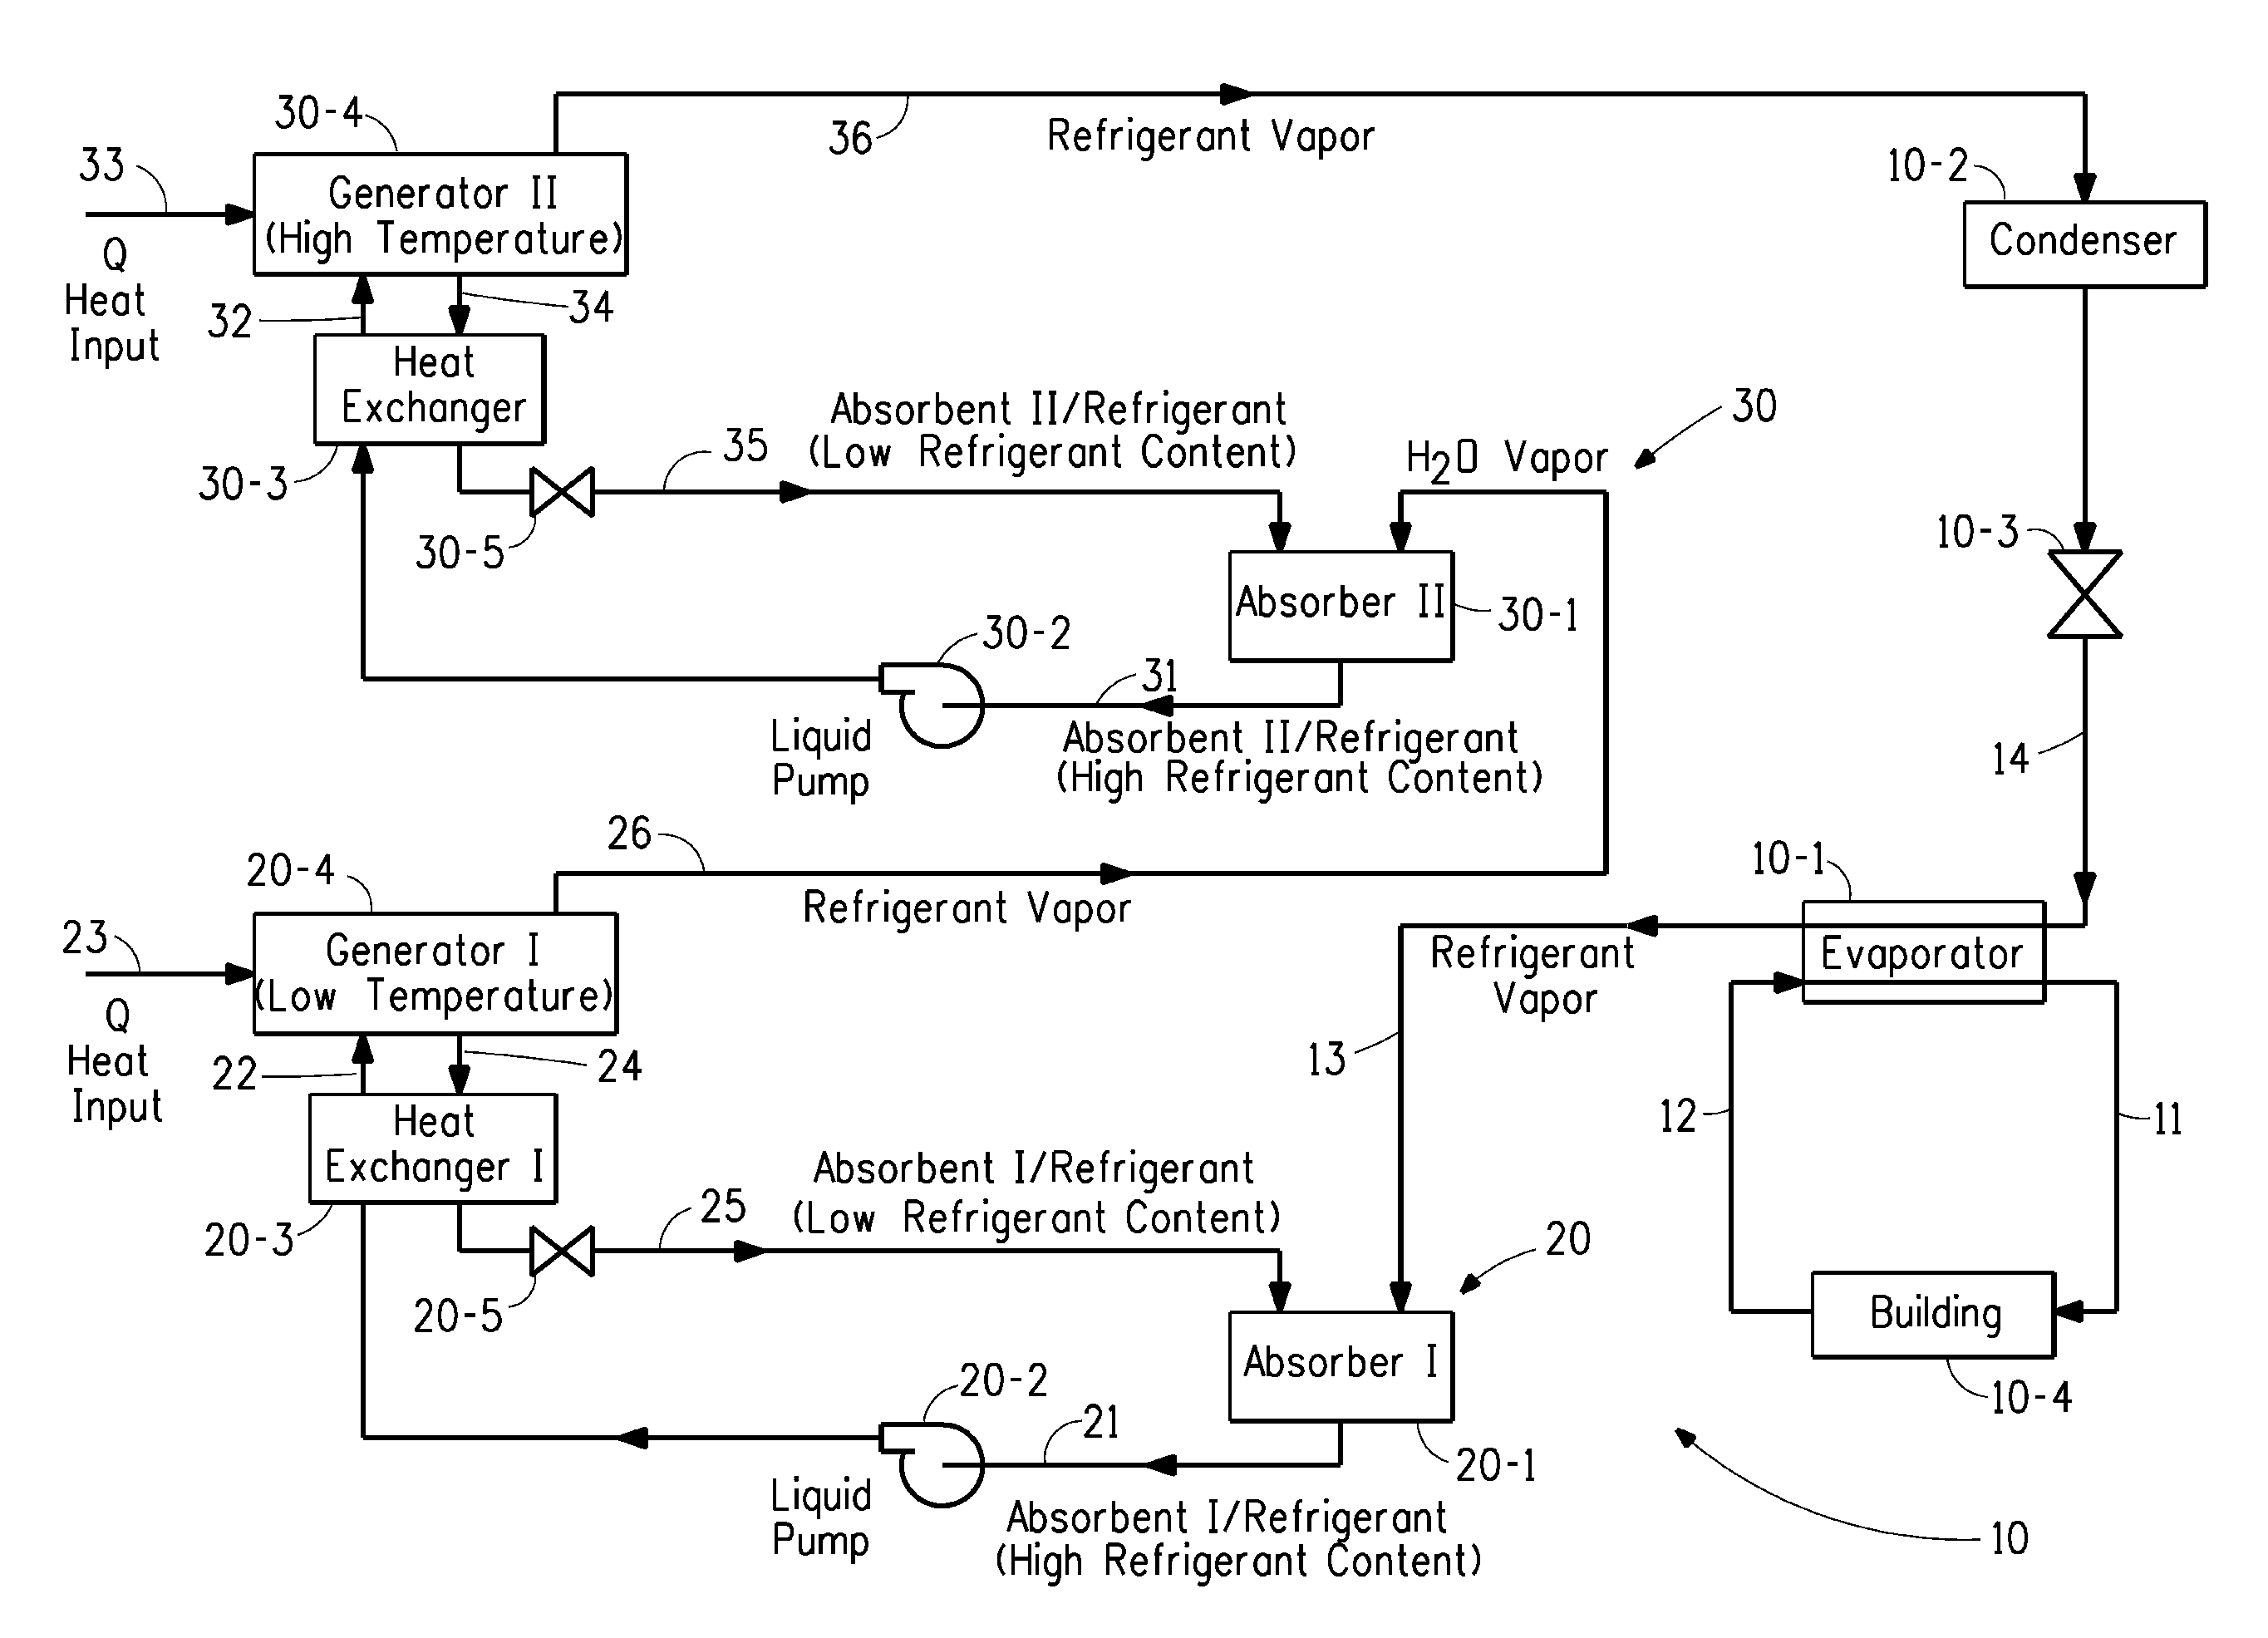 Absorption cycle system having dual absorption circuits